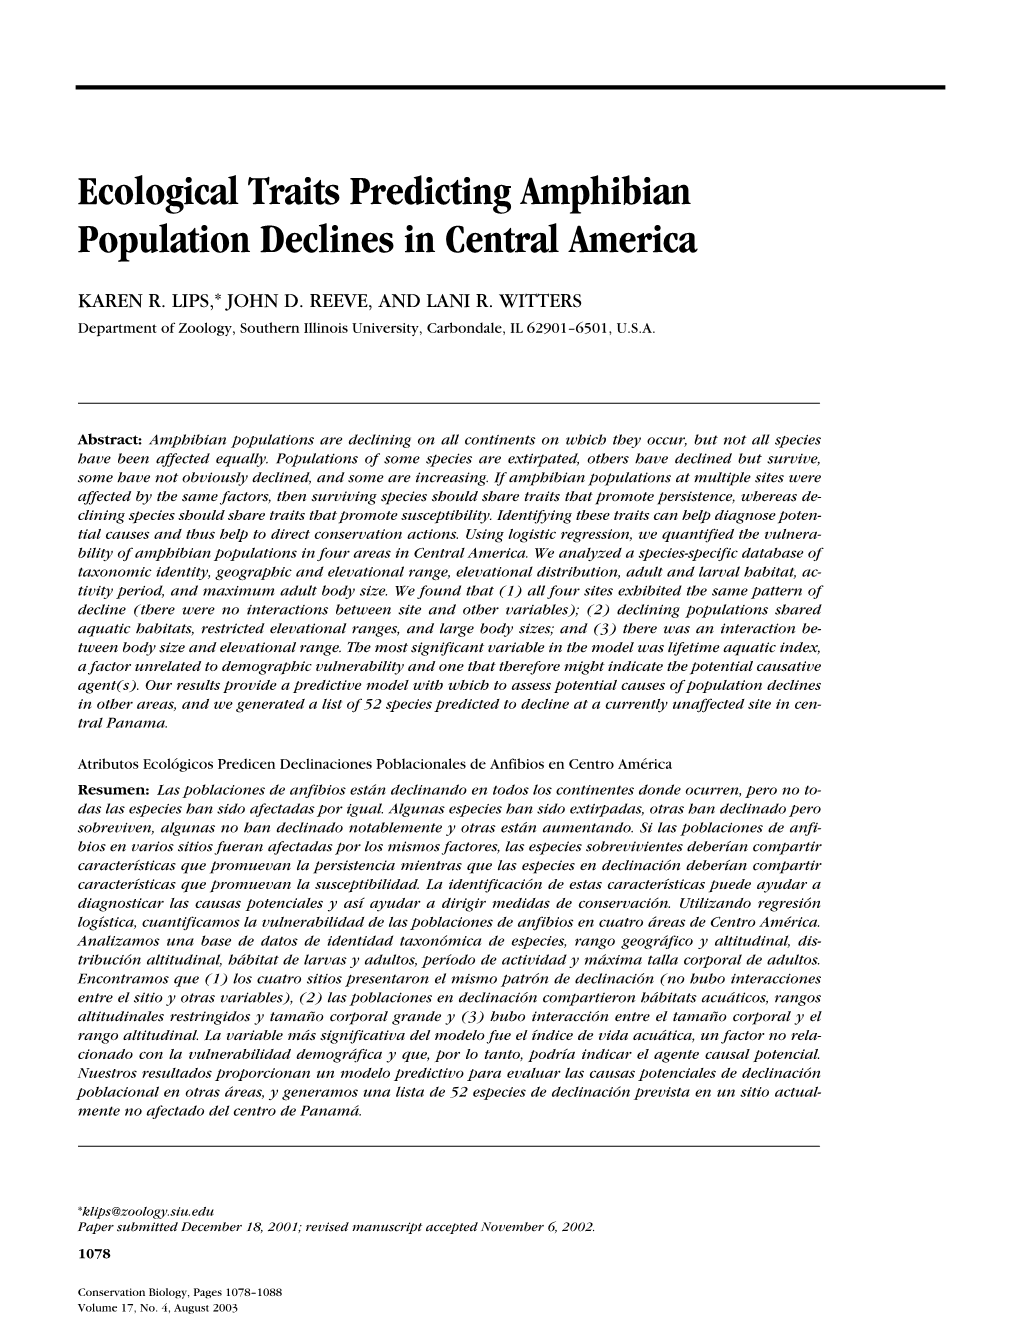 Ecological Traits Predicting Amphibian Population Declines in Central America